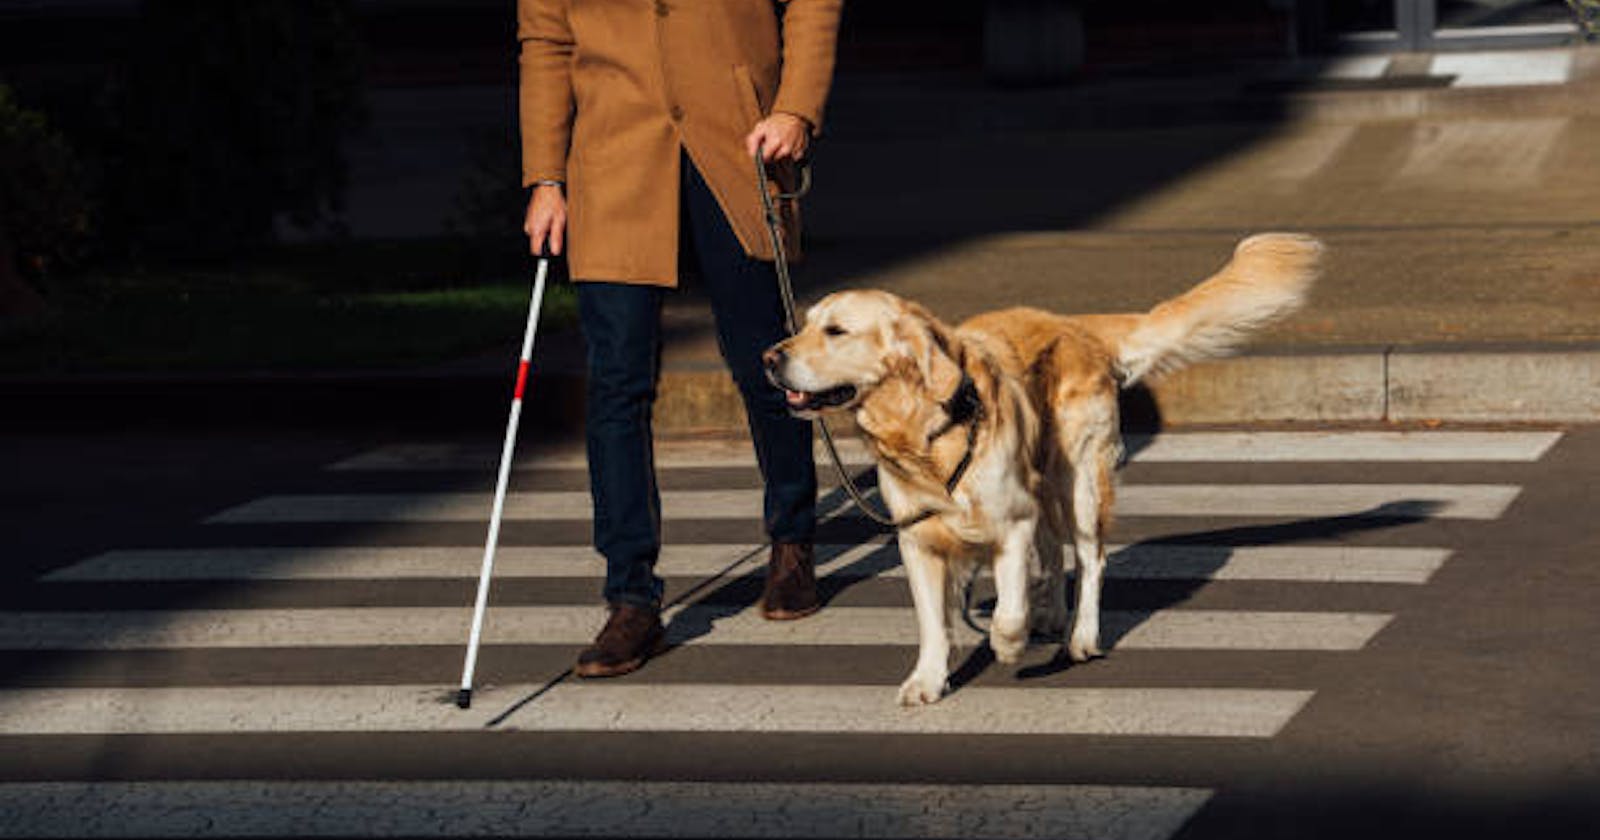 Making an Effective Pathway for Blind People with the Help of
Object Detection and Voice Command